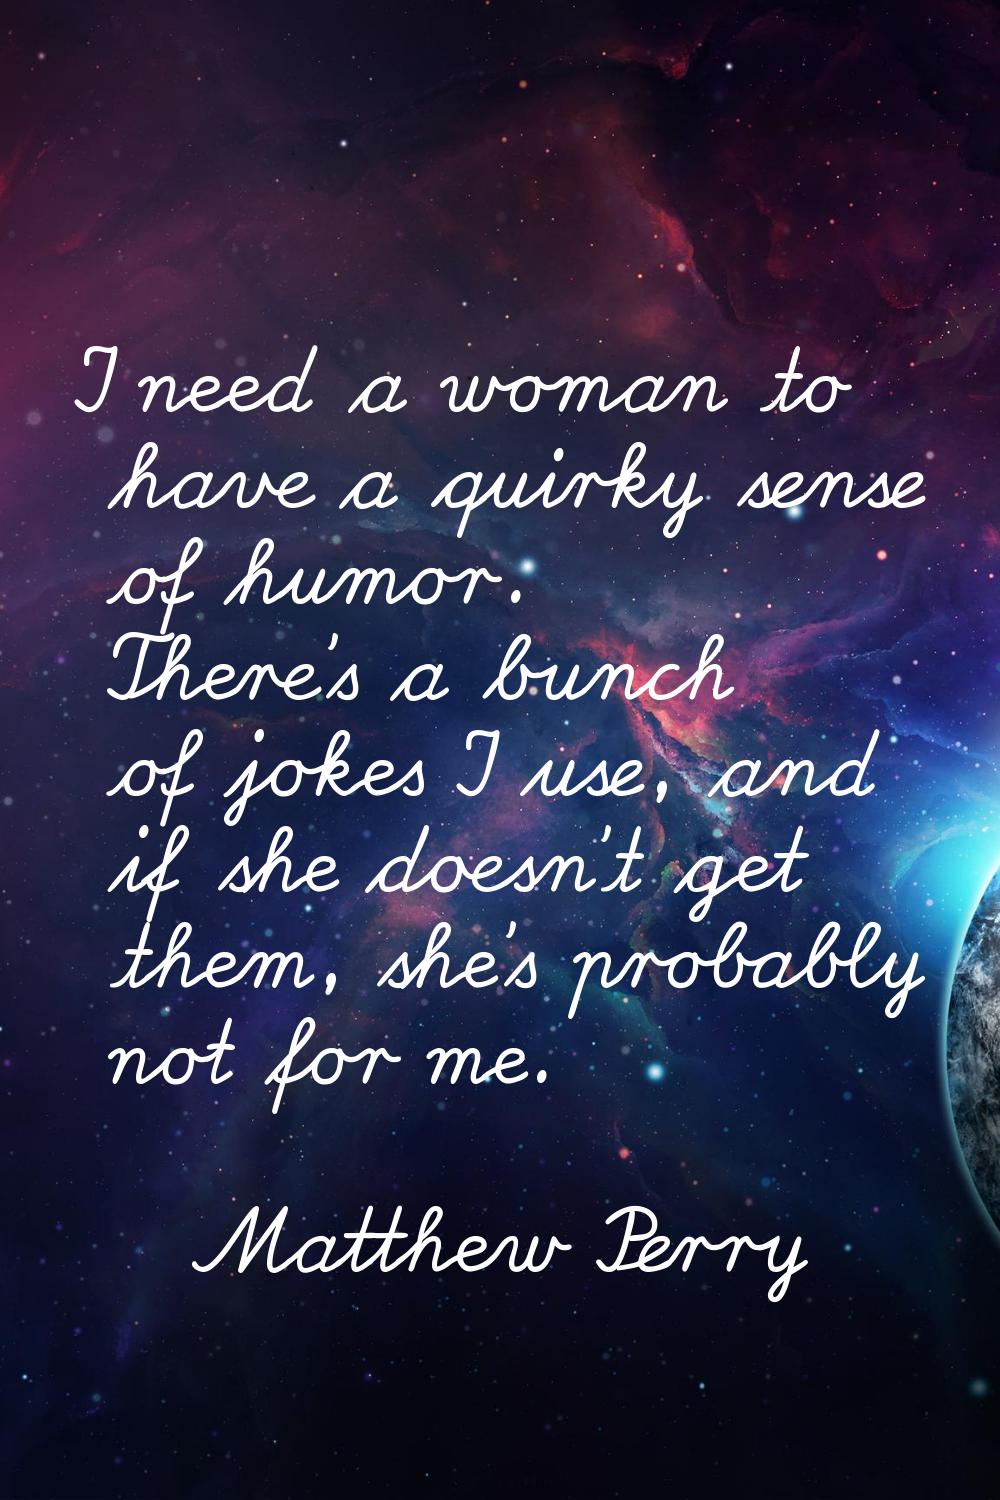 I need a woman to have a quirky sense of humor. There's a bunch of jokes I use, and if she doesn't 